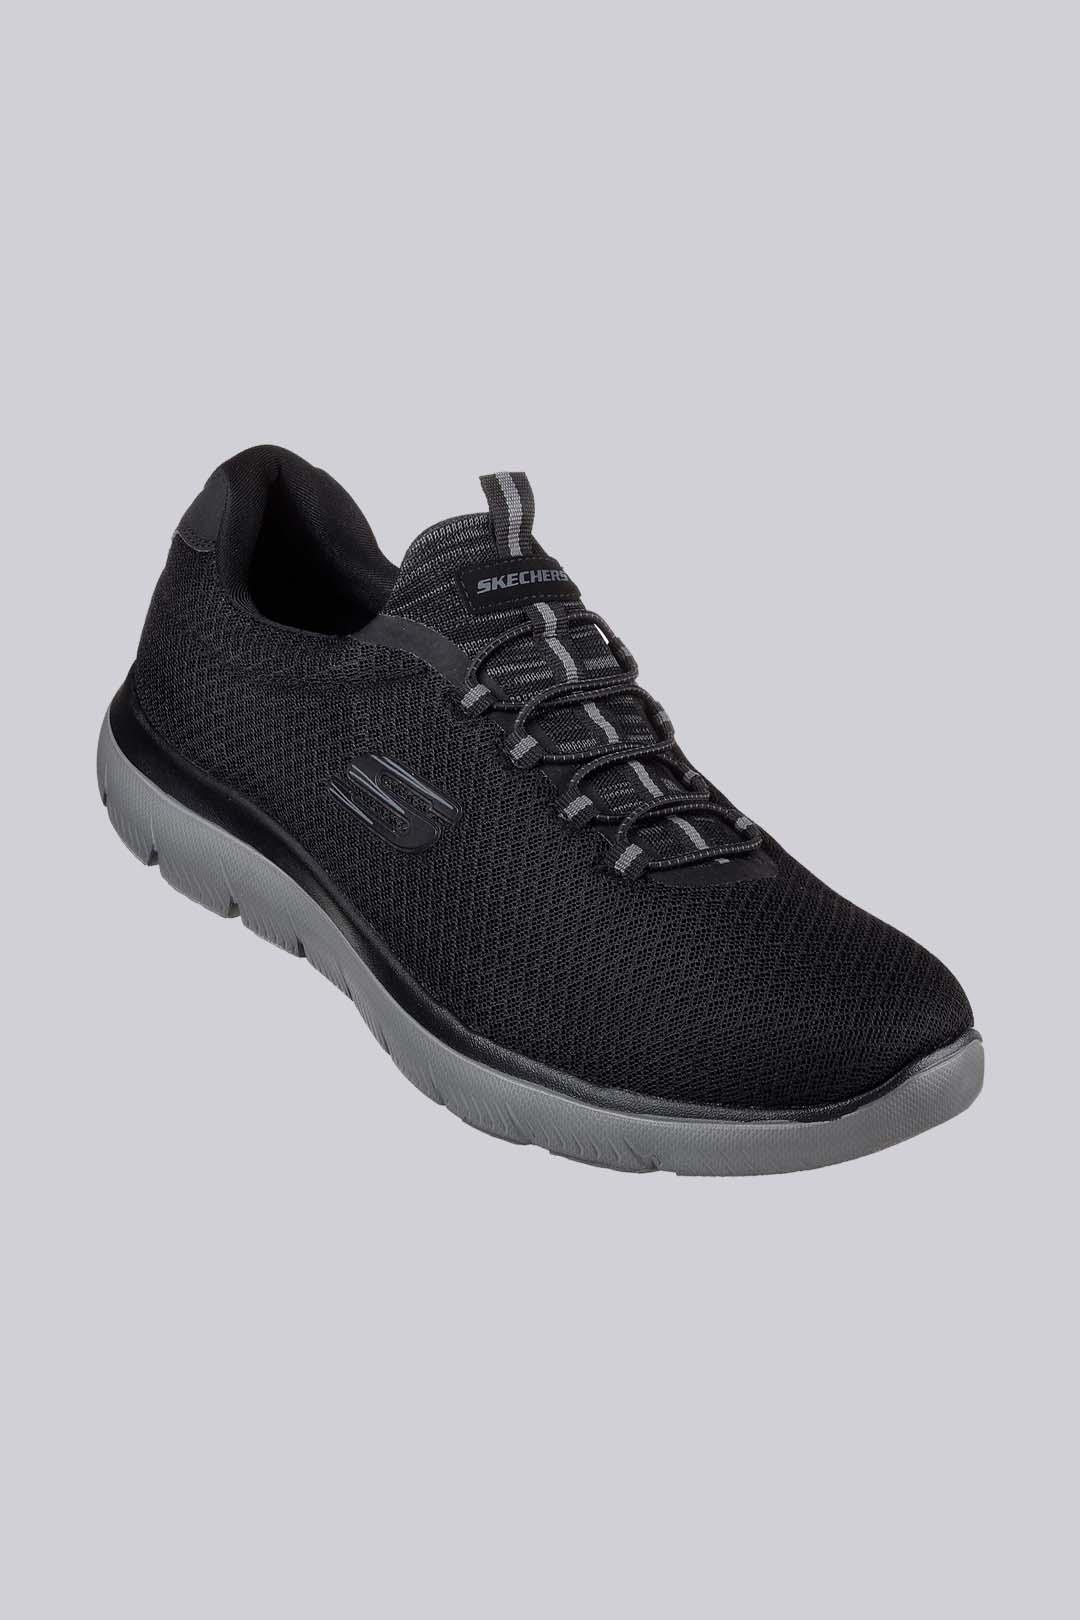 Skechers Men's On Trainer with Bungee Laces